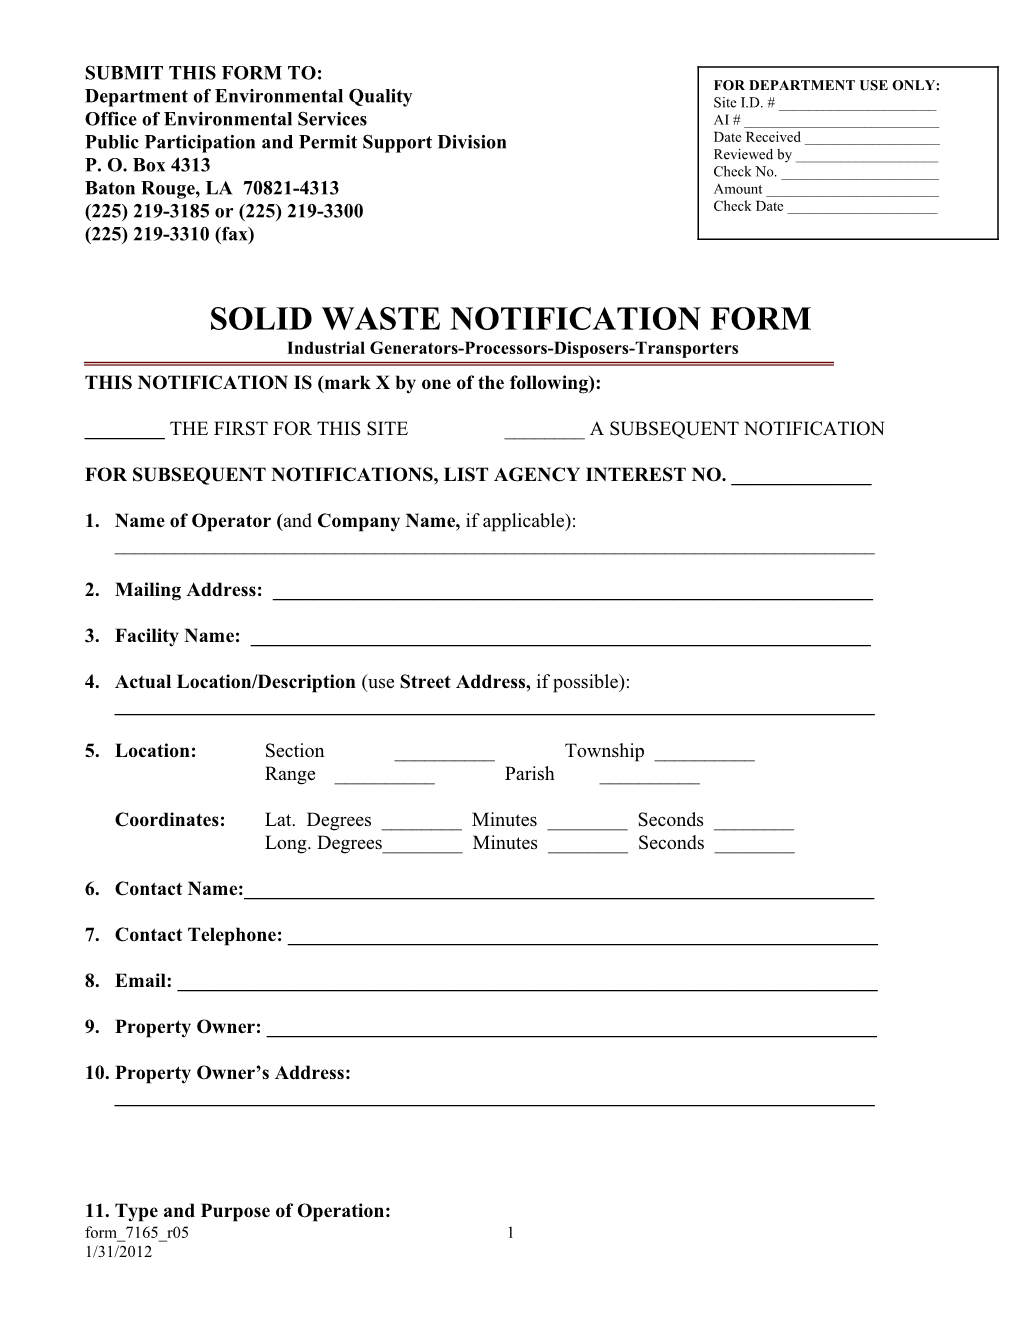 Submit This Form To